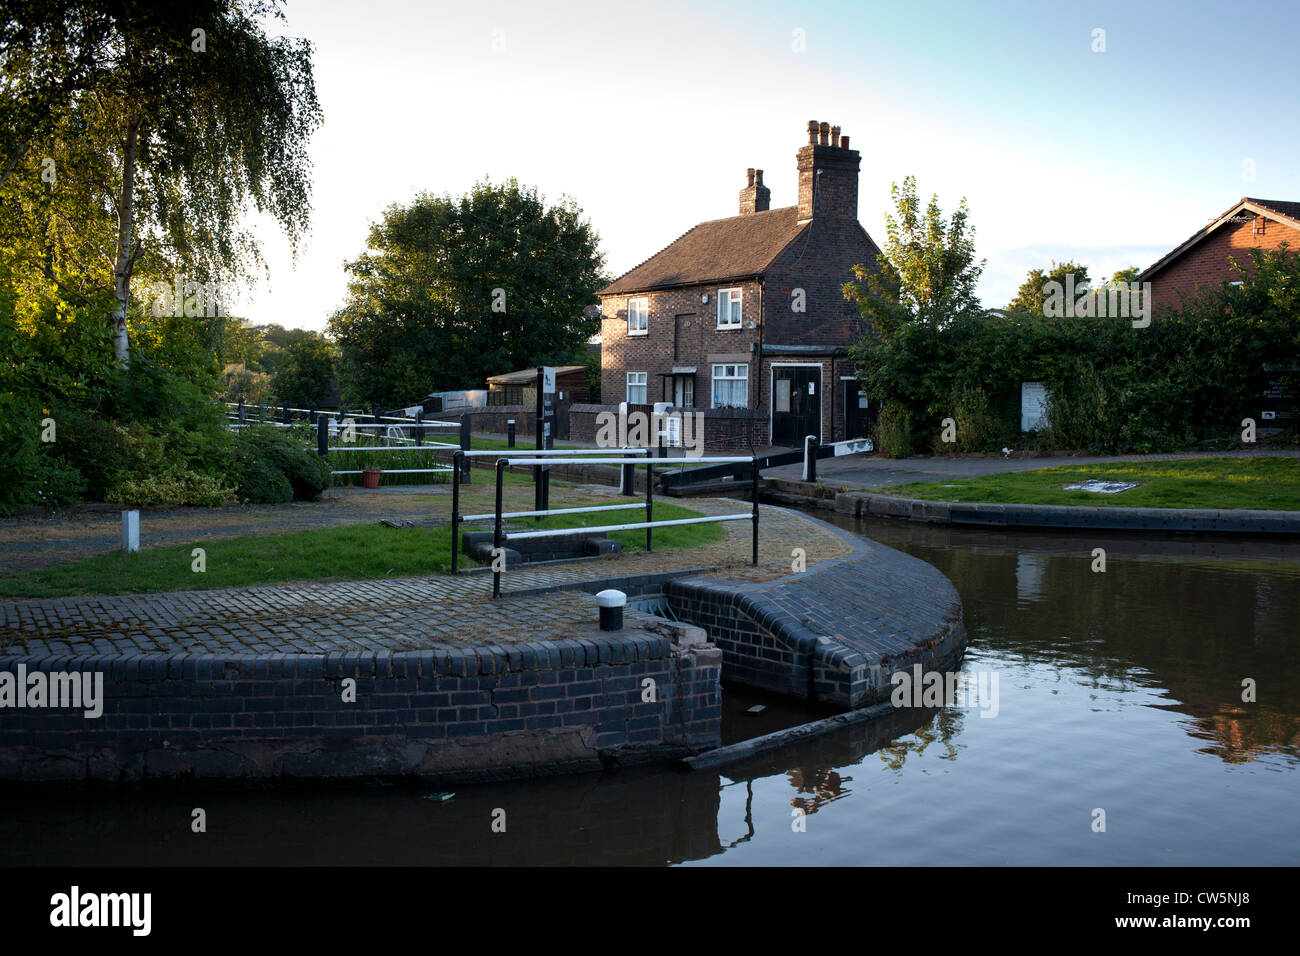 Atherstone Lock Keepers cottage on the Coventry canal. The cottage remains empty. Stock Photo